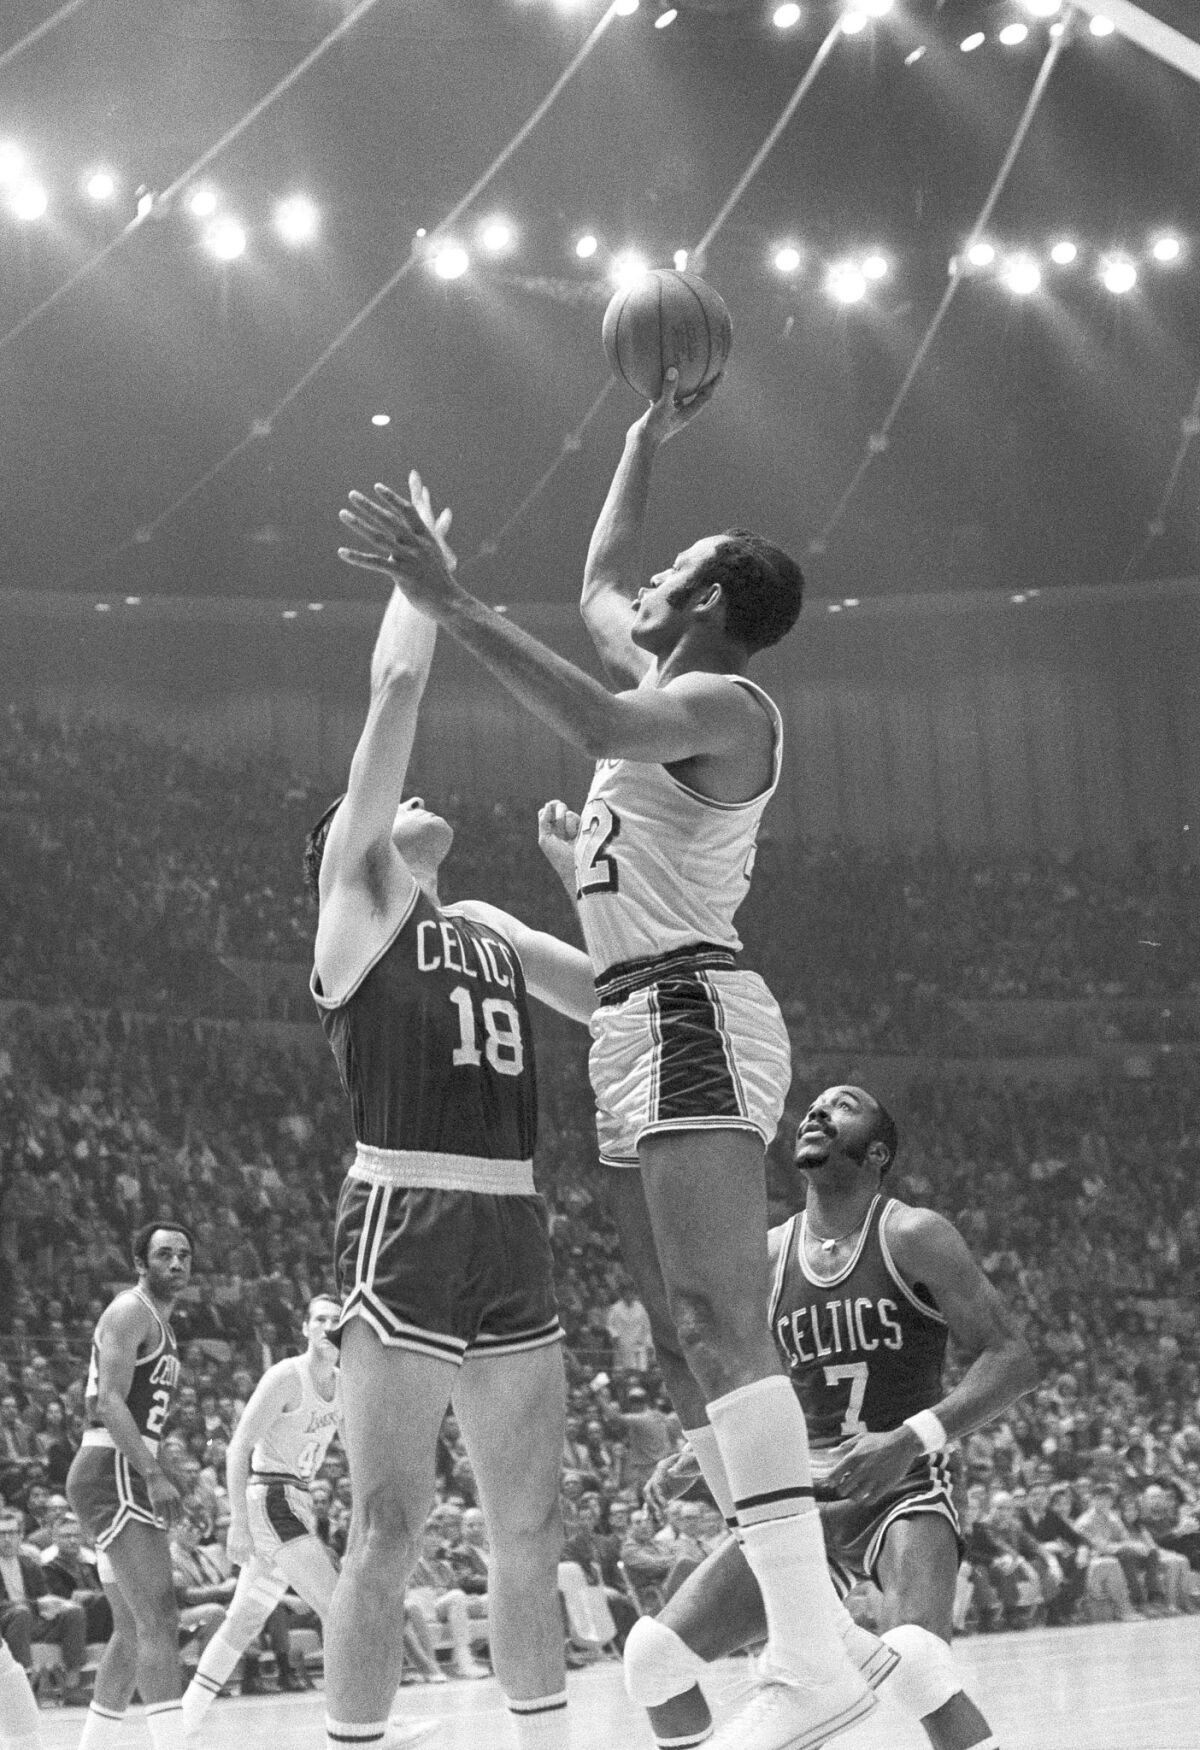 The Lakers' Elgin Baylor fires a jump shot against the Boston Celtics in the seventh and final game of their NBA playoff series at Los Angeles, May 5, 1969.